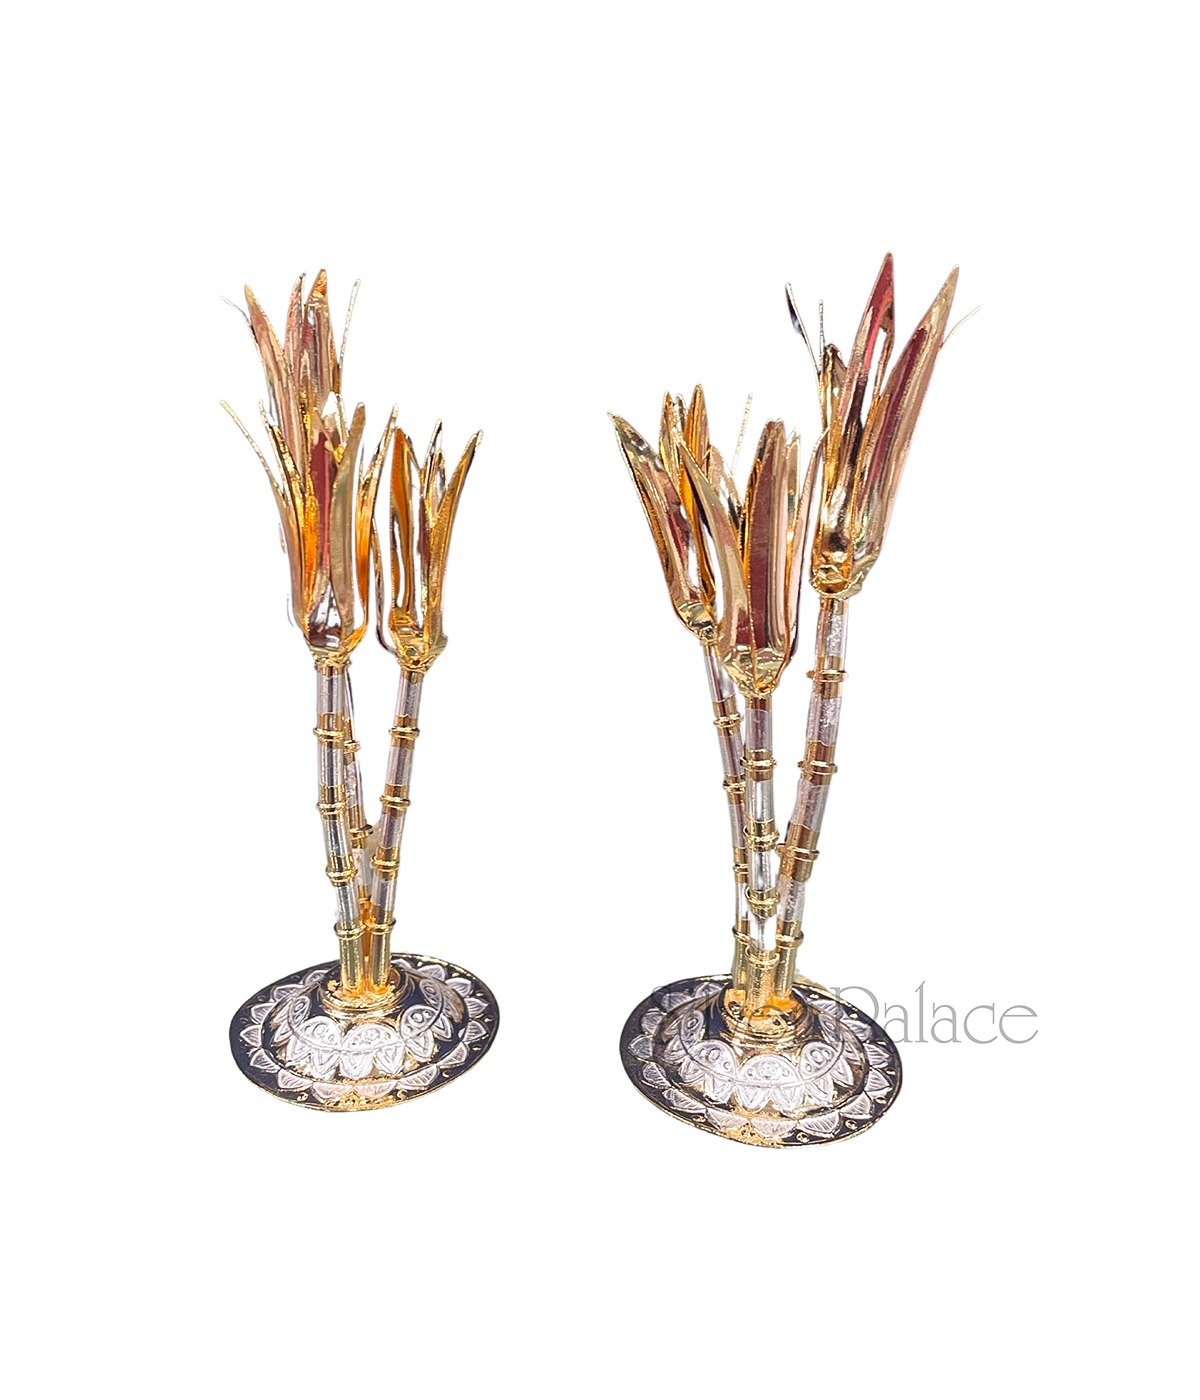 SILVER SUGARCANE STALK FOR POOJA WITH GOLD TOUCH